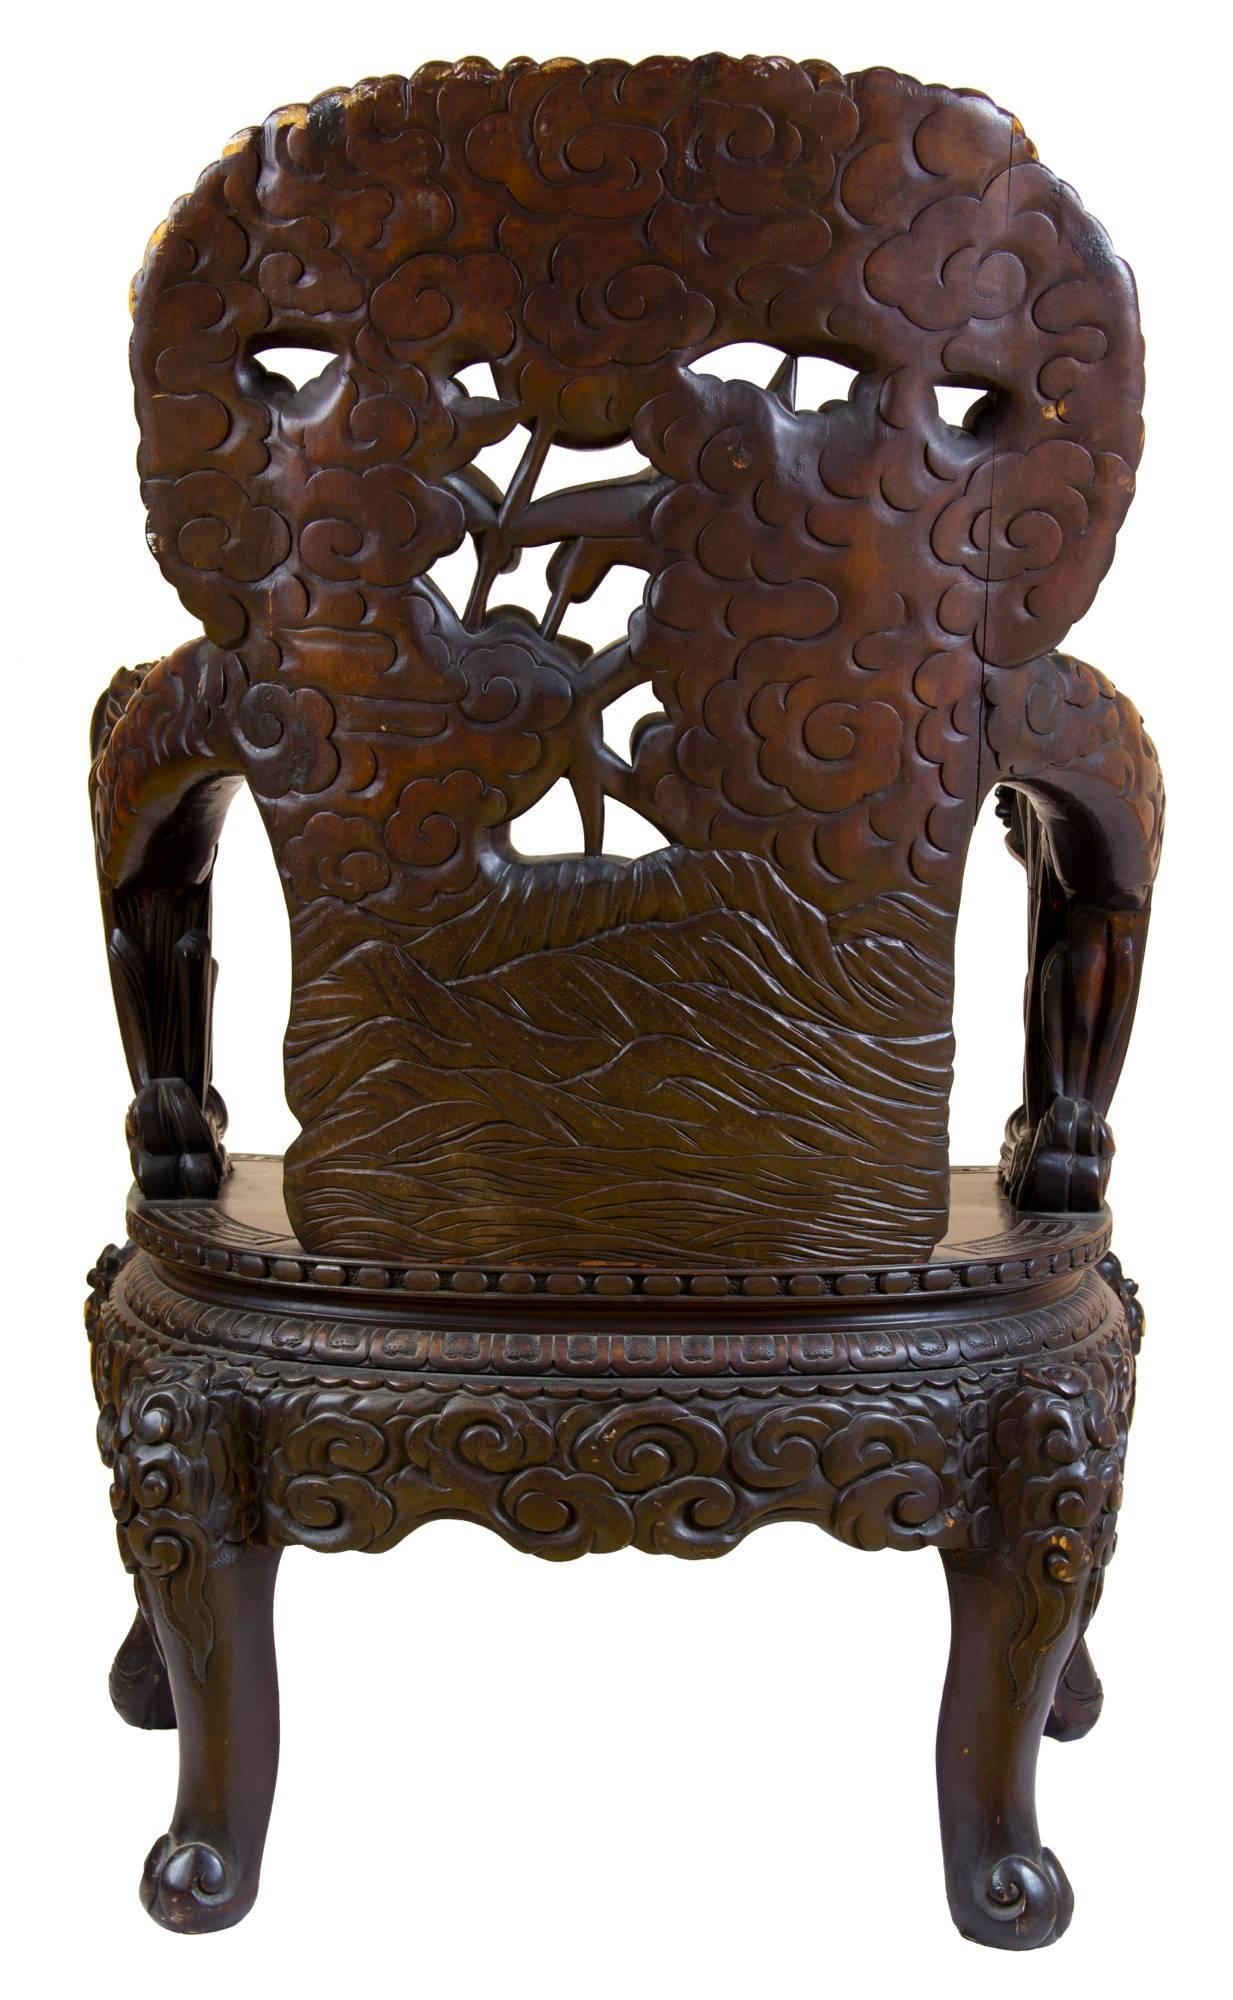 Hand-Carved Exuberant Wood Armchair with Bird Motif and Floral Carving, Late 19th Century For Sale